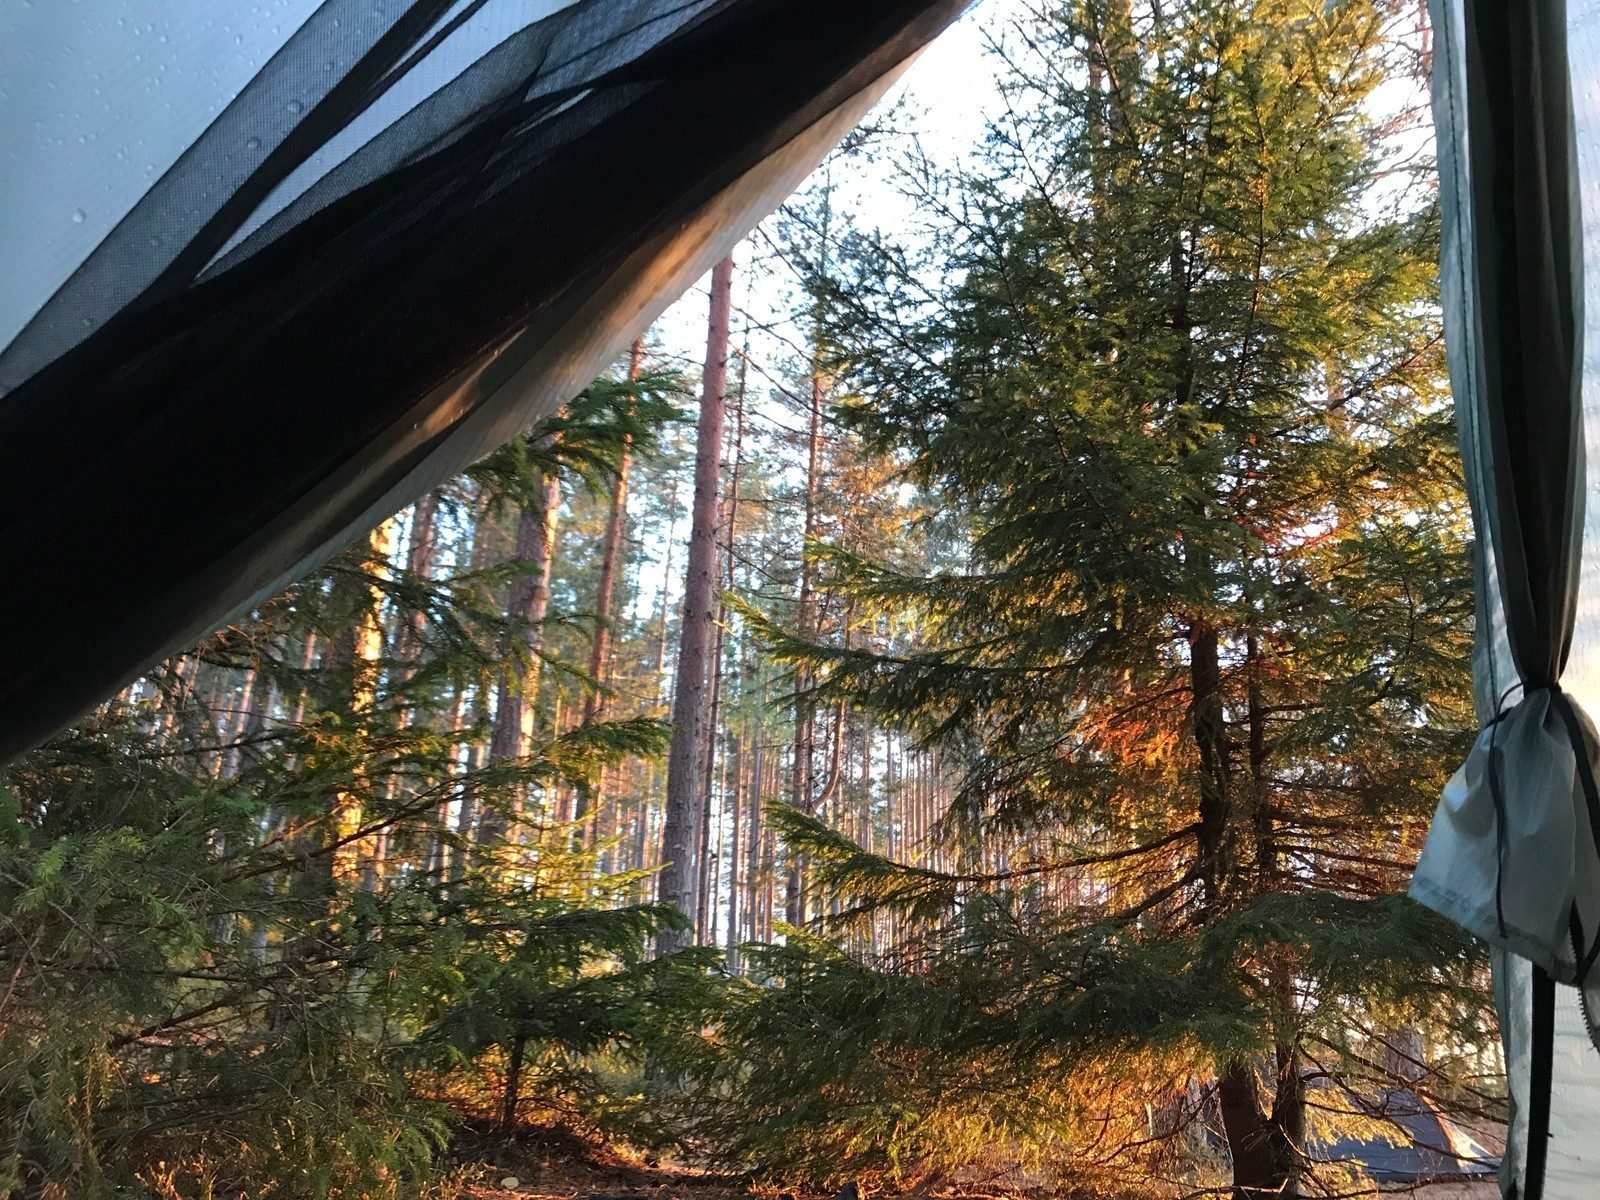 View of trees from a tent, while out wild camping